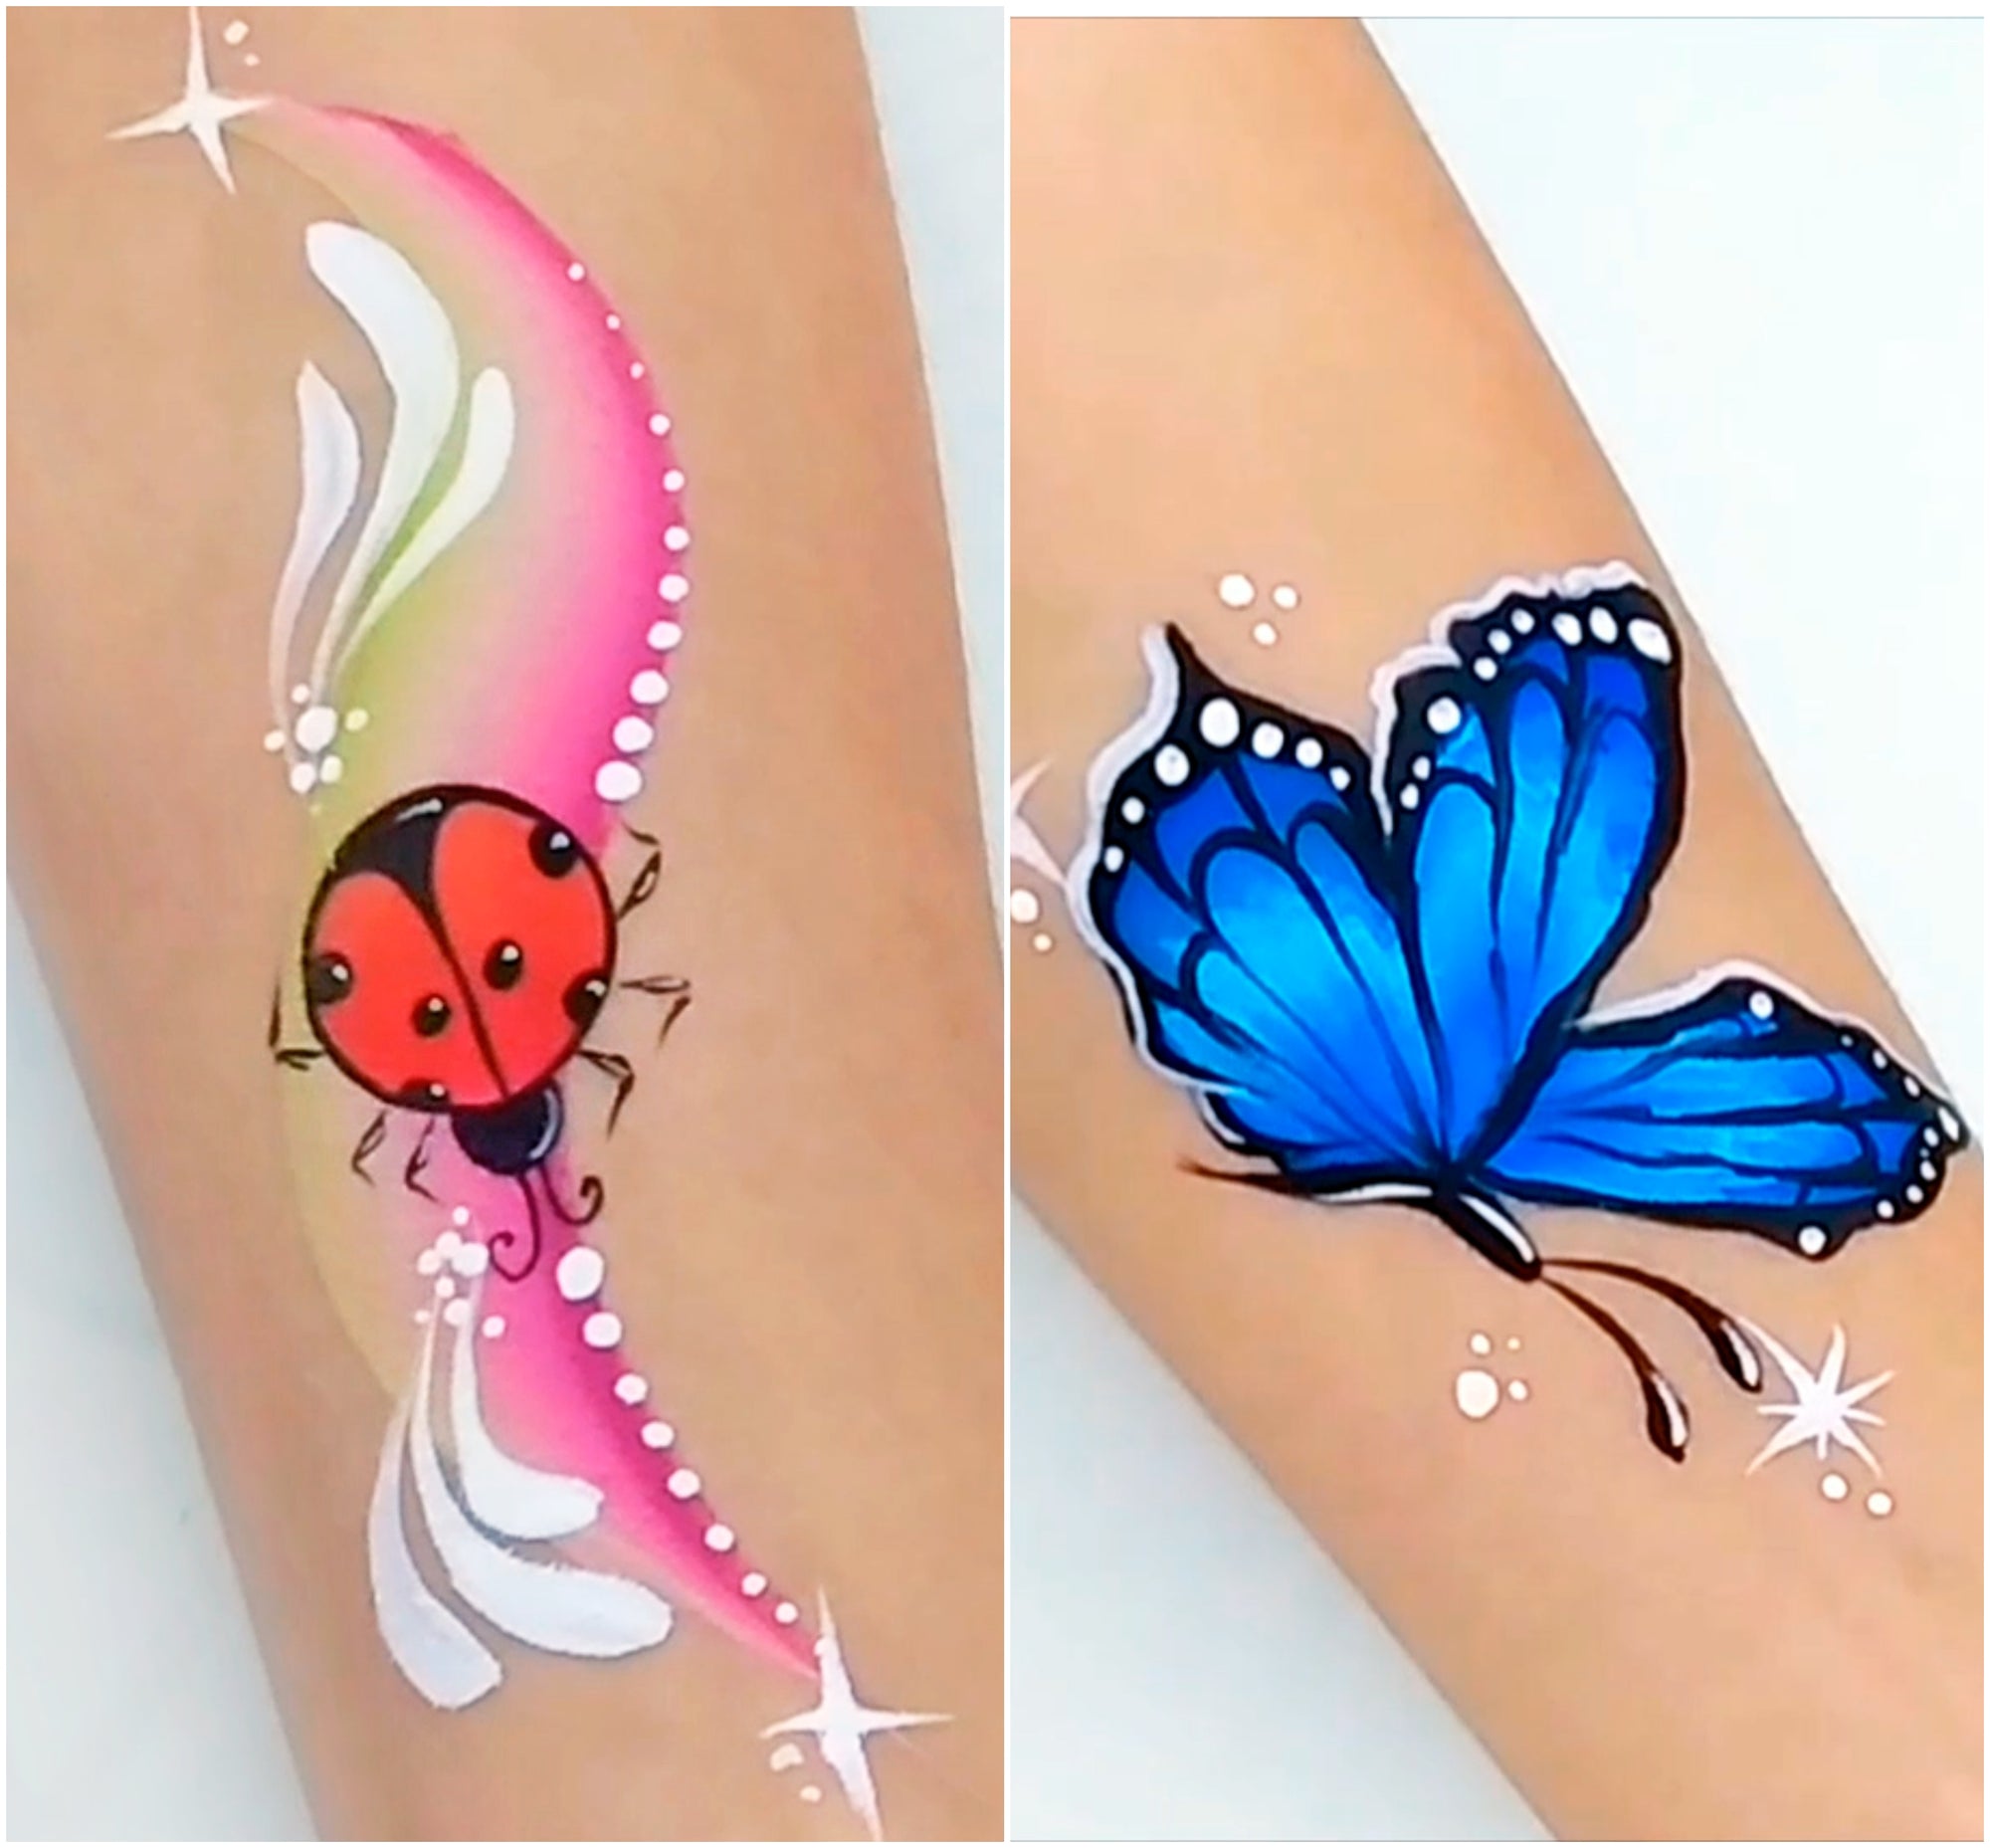 Quick Bug Designs: Ladybug and Butterfly by Marta Ortega